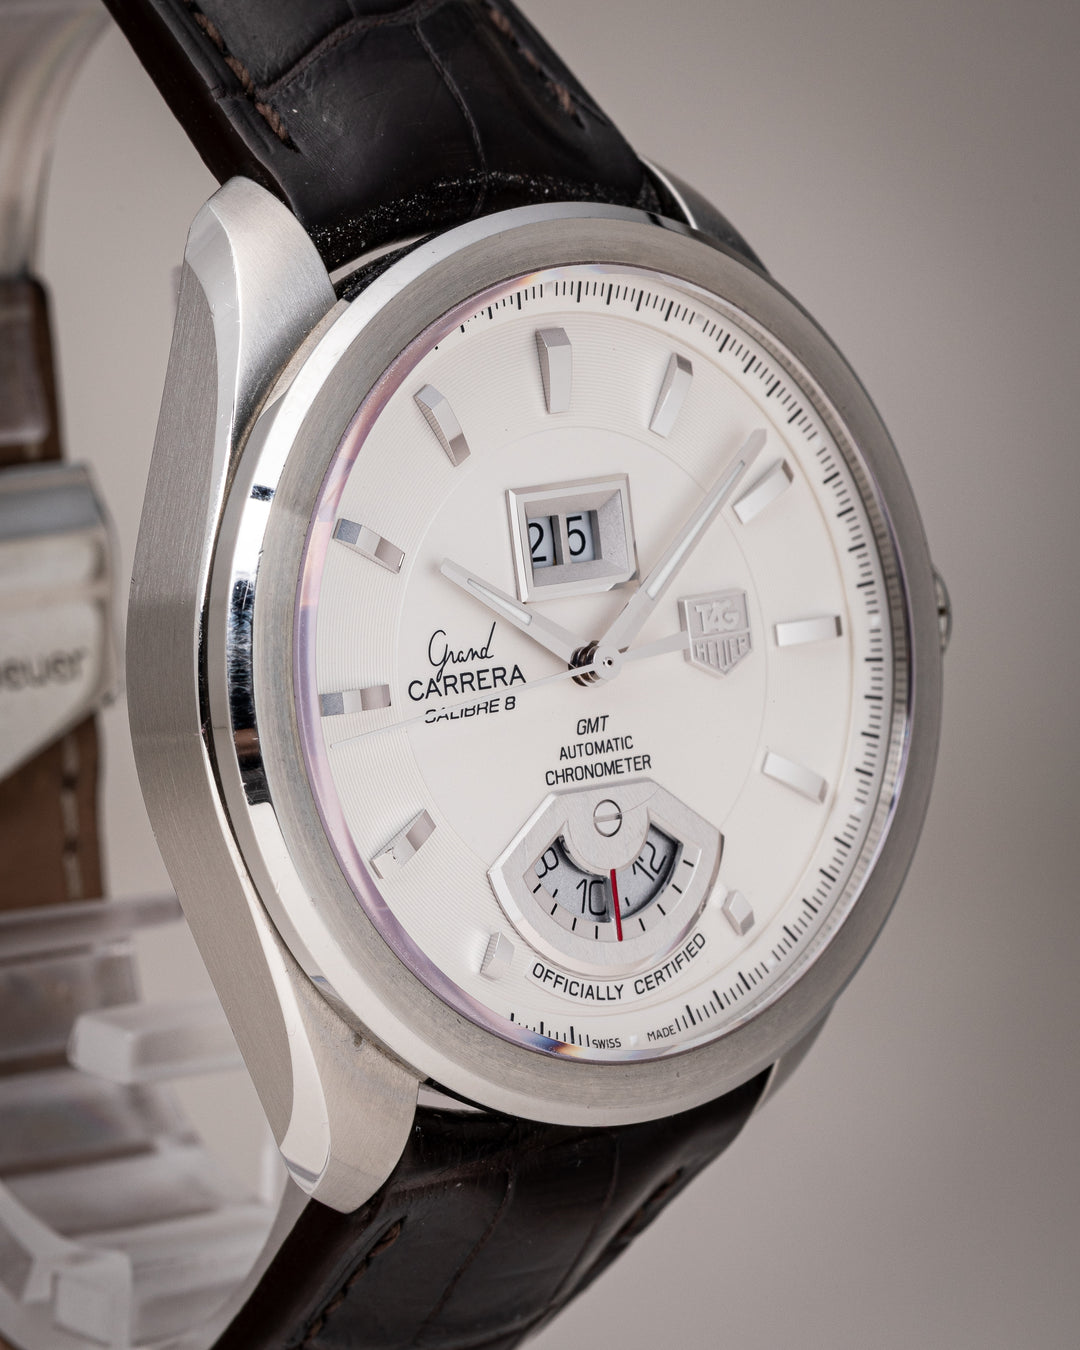 TAG Heuer Stainless Steel Grand Carrera Calibre 8 GMT (WAV5112)